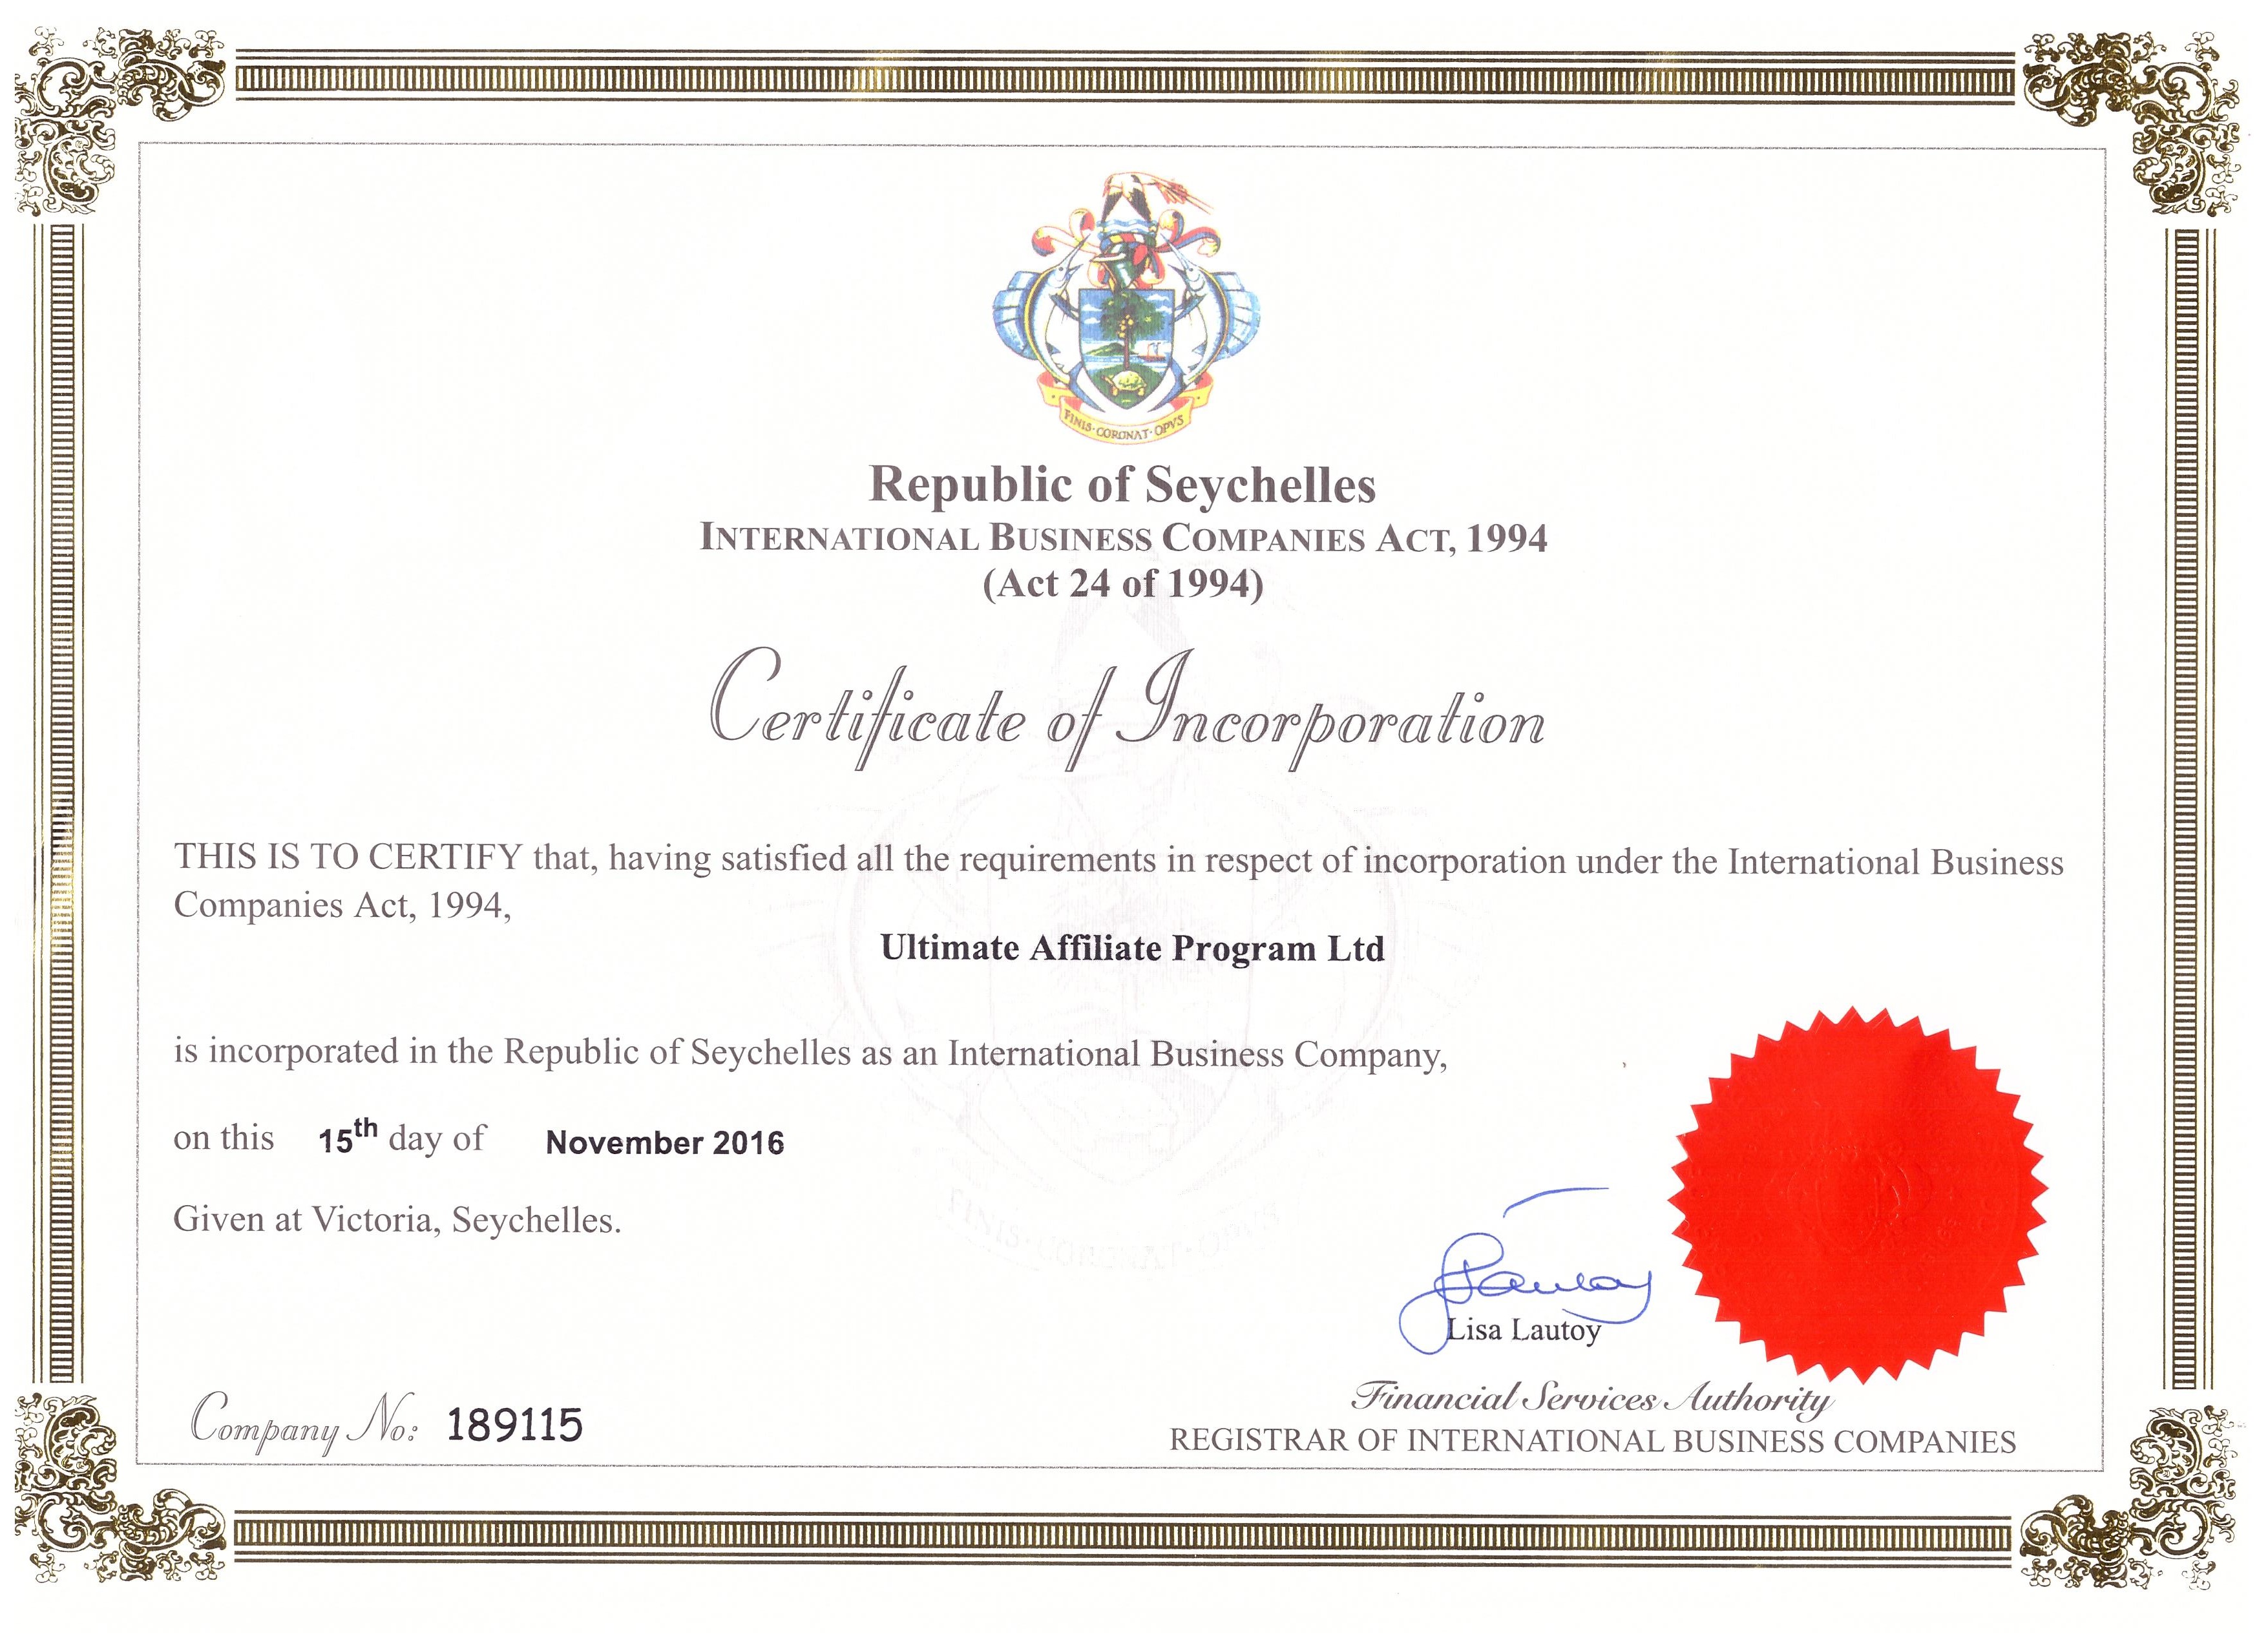 Certificat of Incorparation